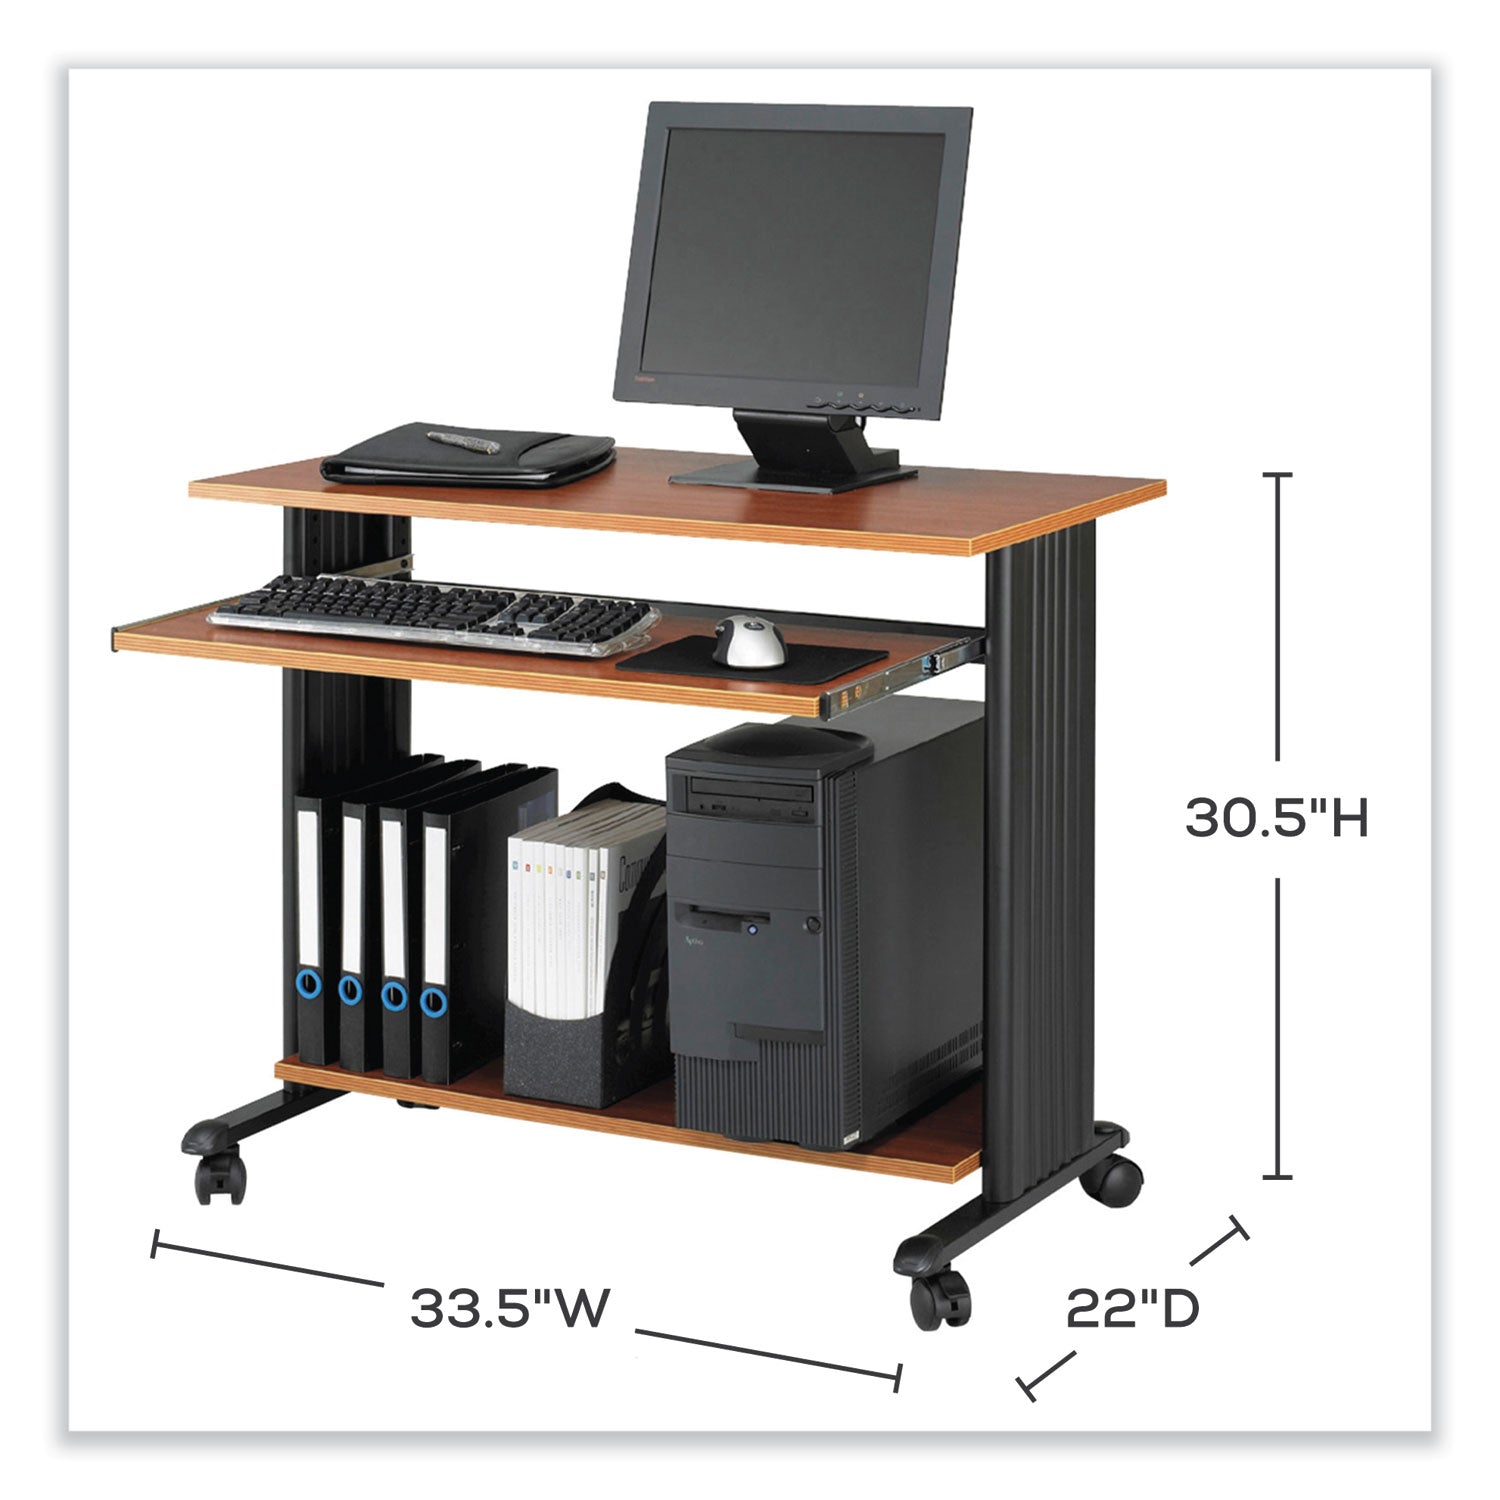 Muv Standing Desk, 35.5" x 22" x 30.5", Cherry, Ships in 1-3 Business Days - 